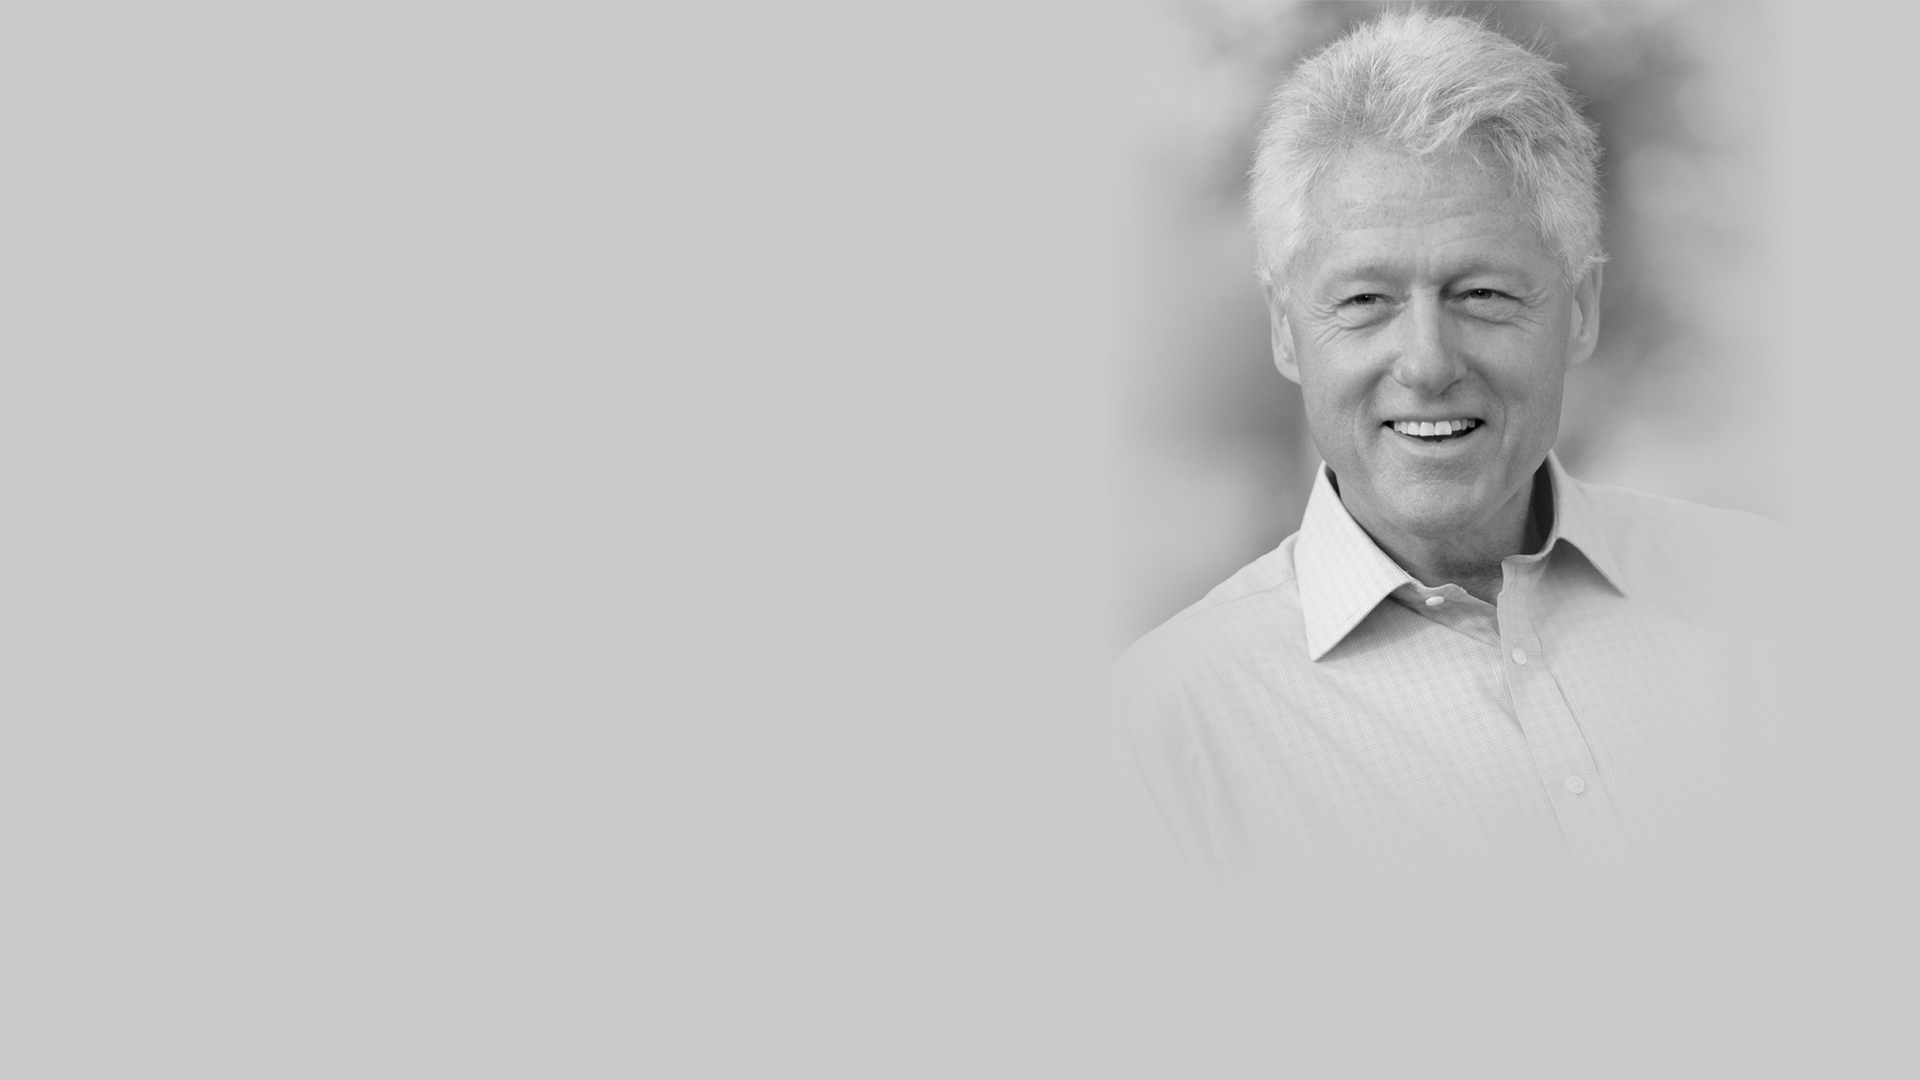 Bill Clinton is keynote speaker at the Sharepoint Conference